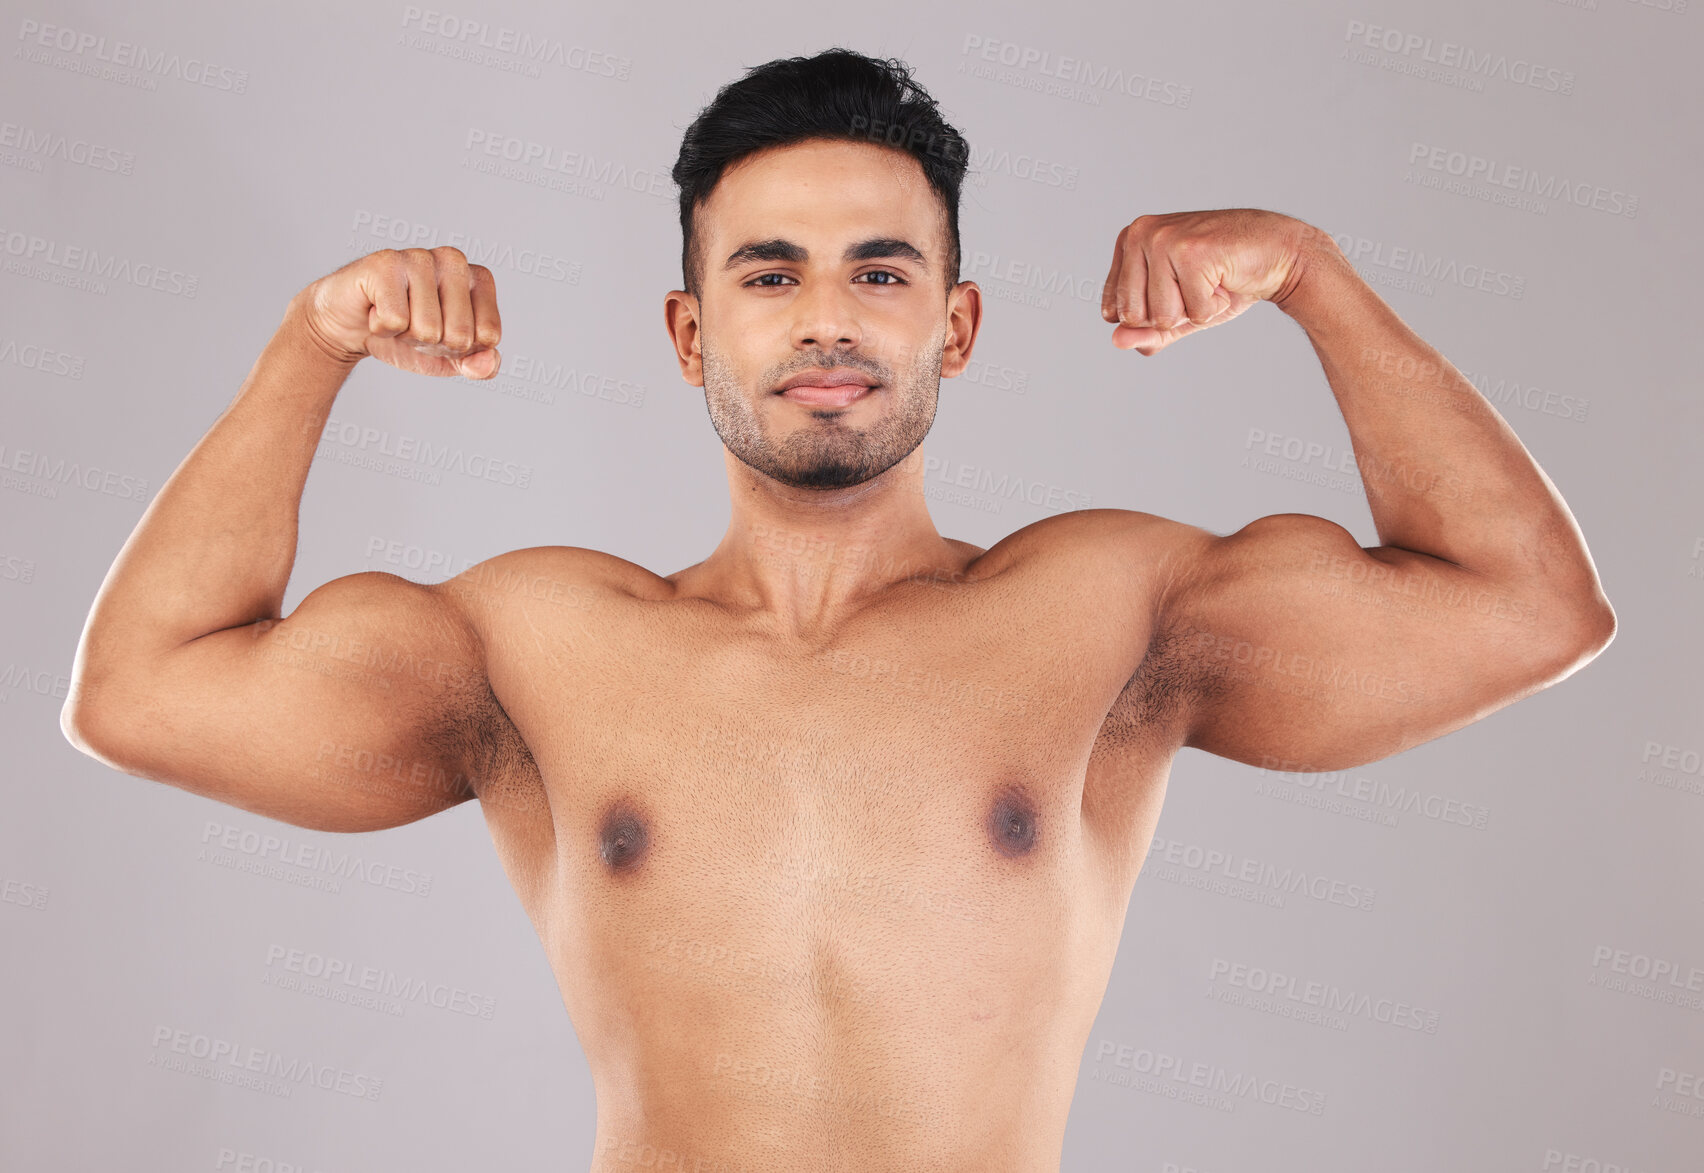 Buy stock photo Fitness, portrait and man flexing muscle on gray studio background. Sports, wellness and proud Indian body builder showing biceps, power and arm strength during training, exercise or body workout.
